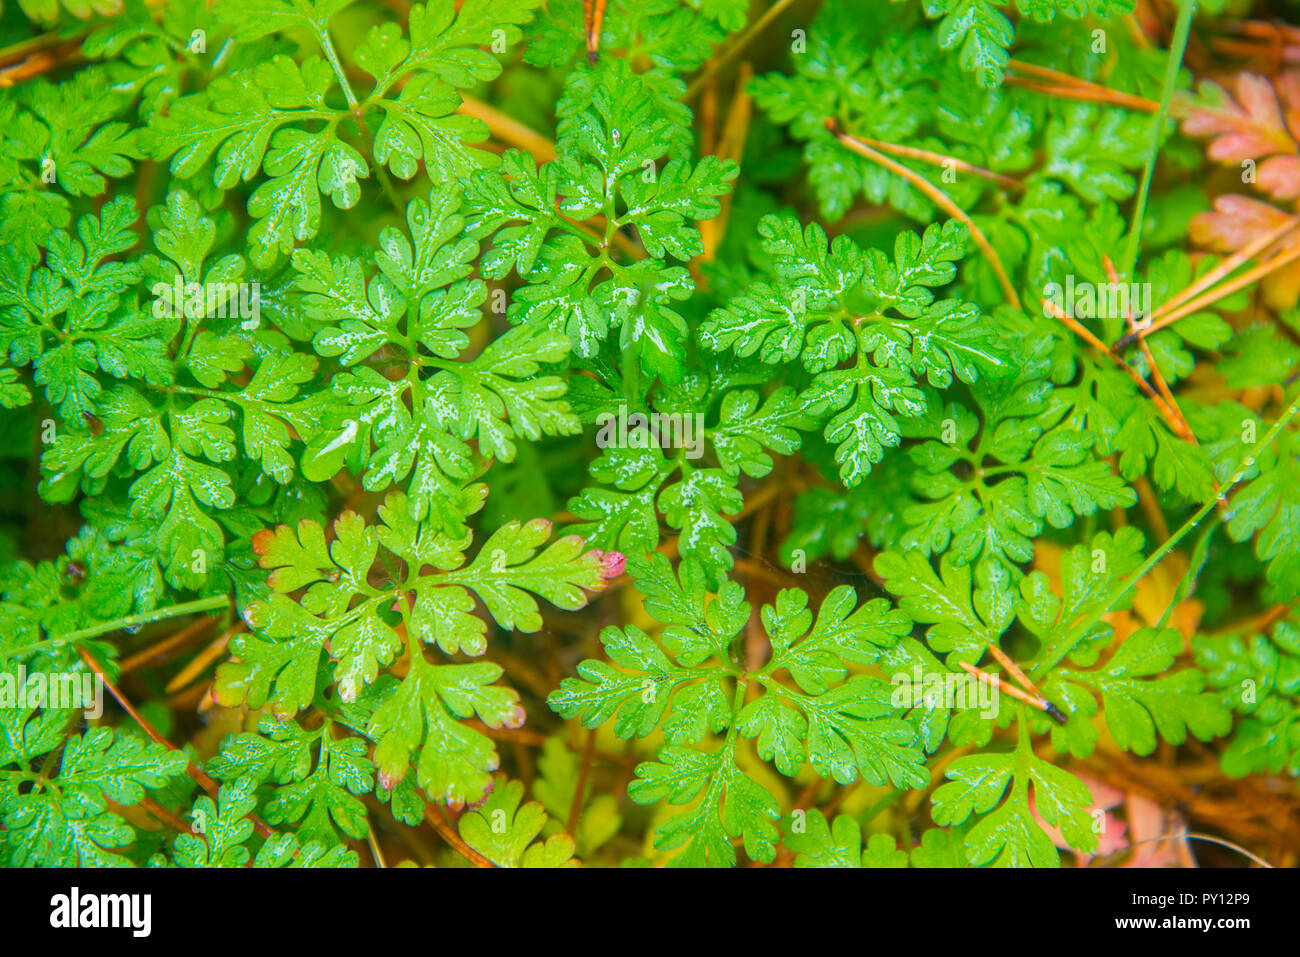 Green leaves. Stock Photo